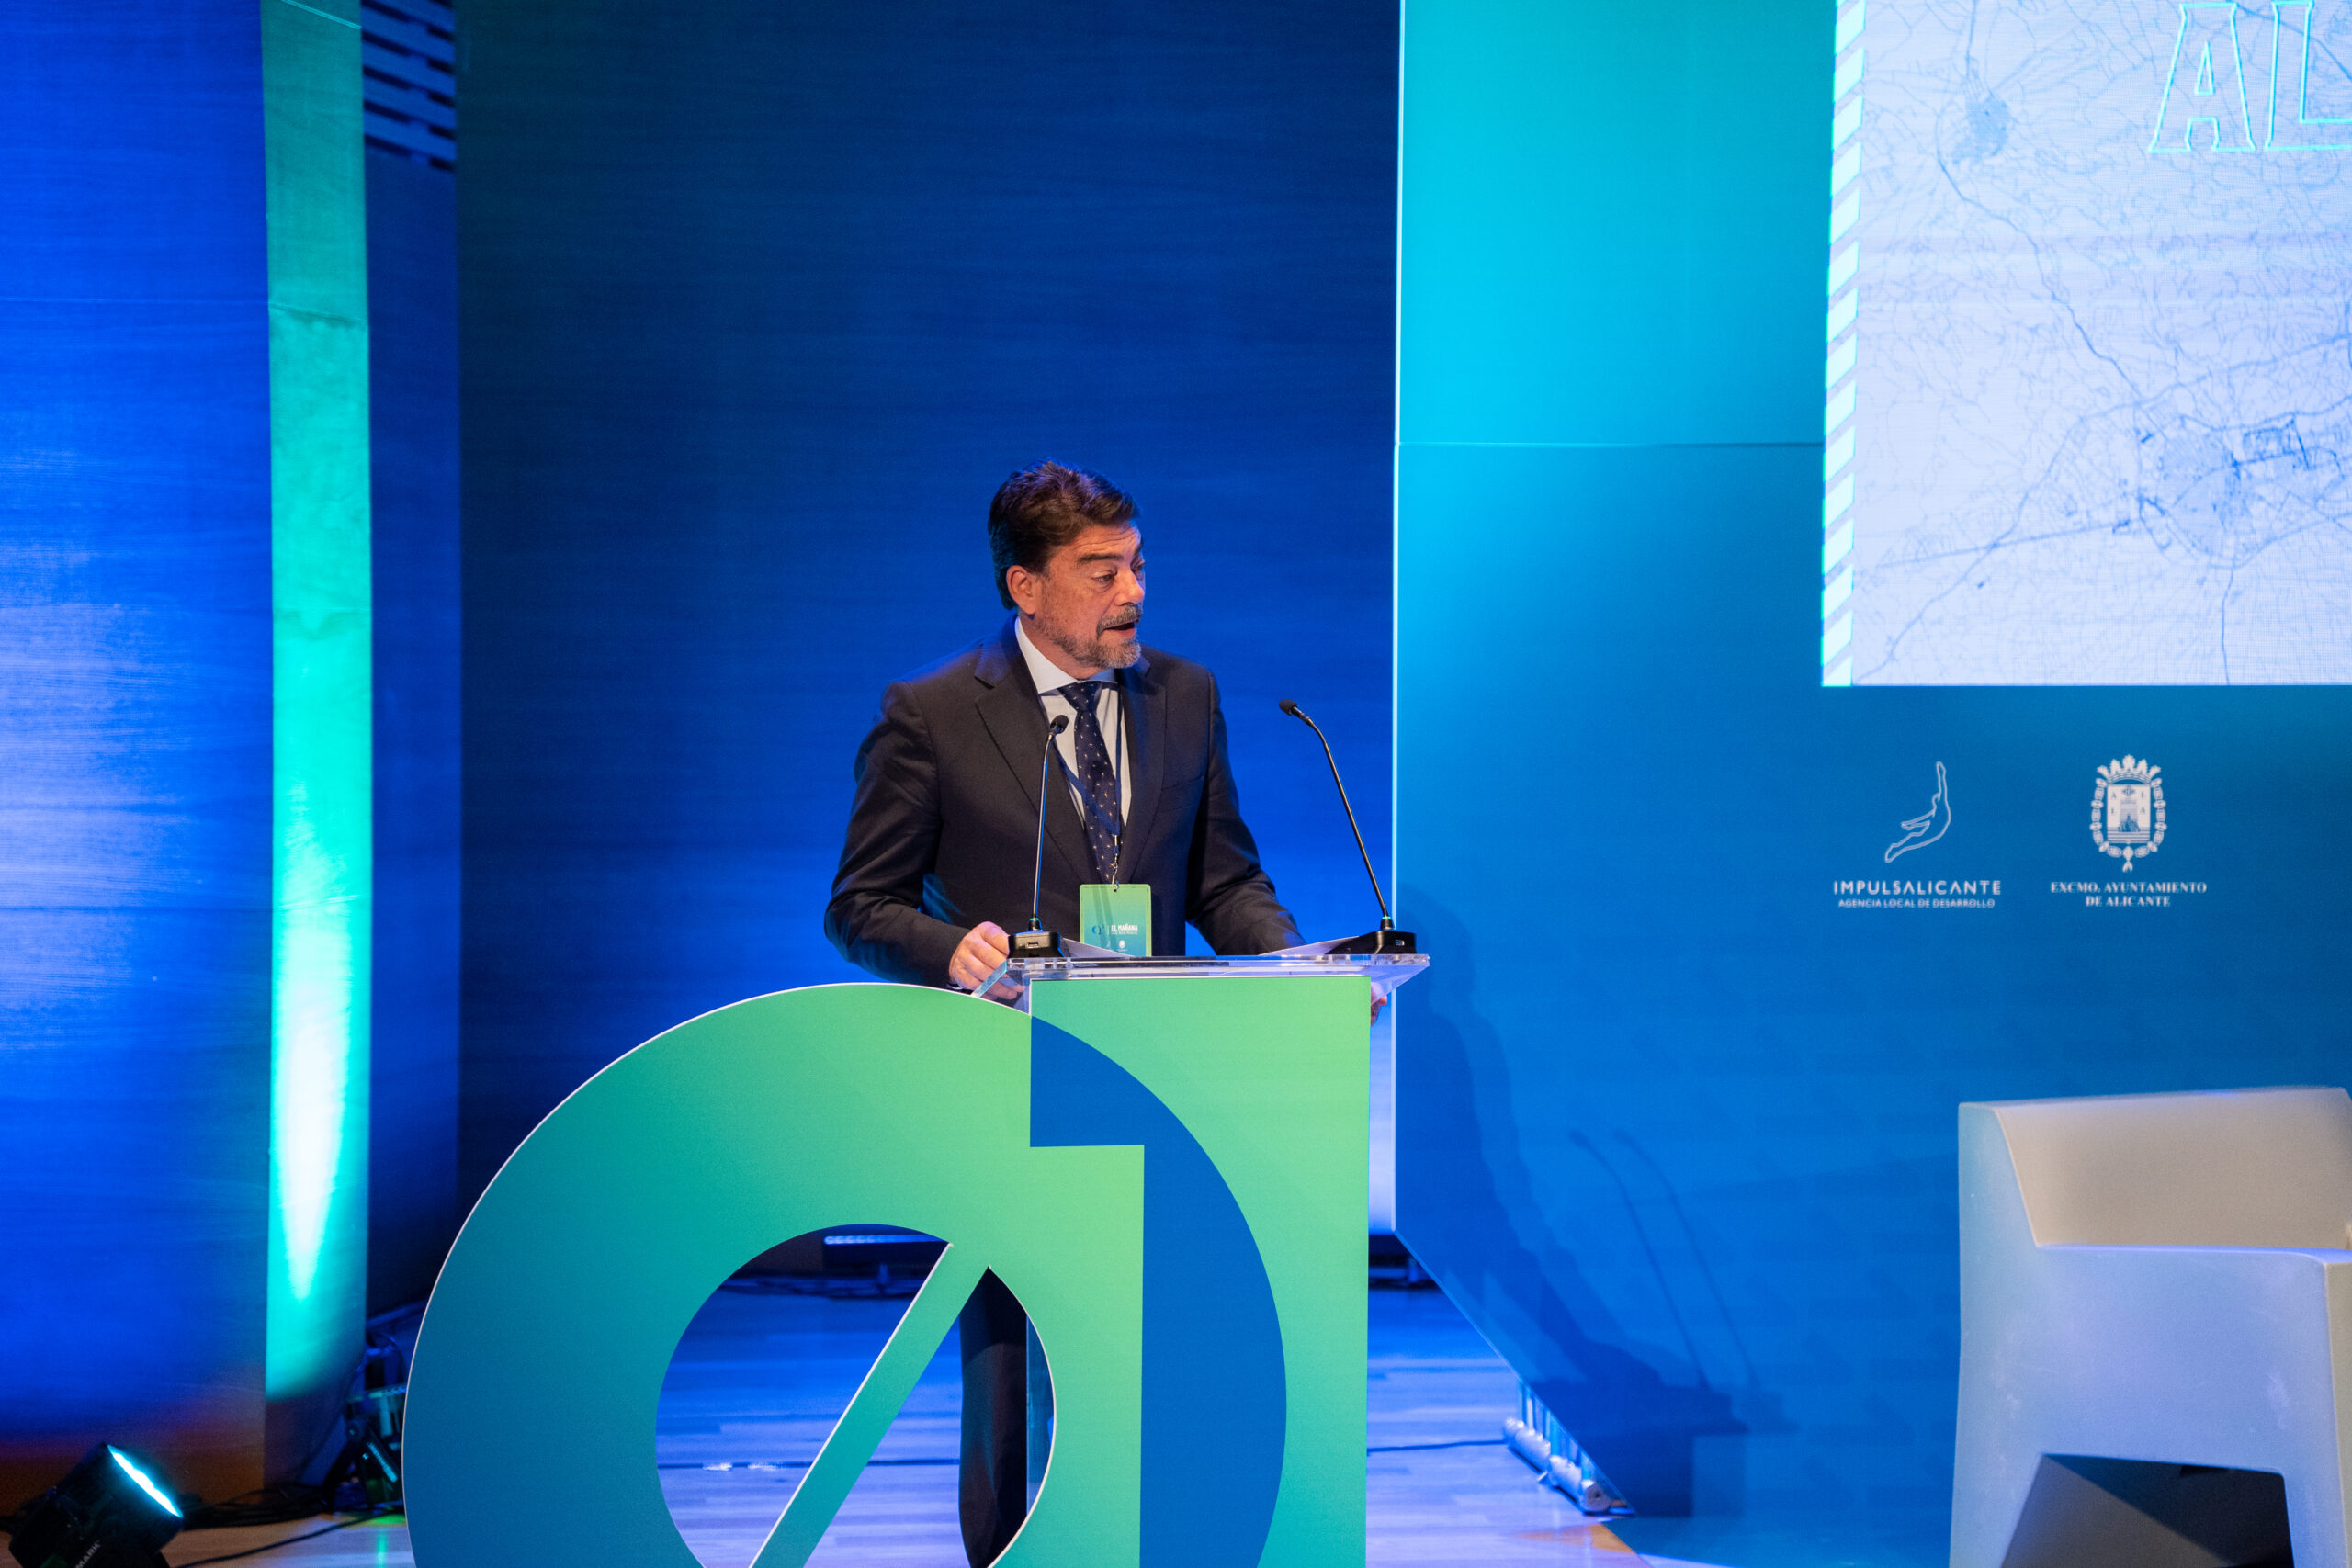 The debate on digitalisation and new technologies in the Public Administration opens the Alicante Futura congress